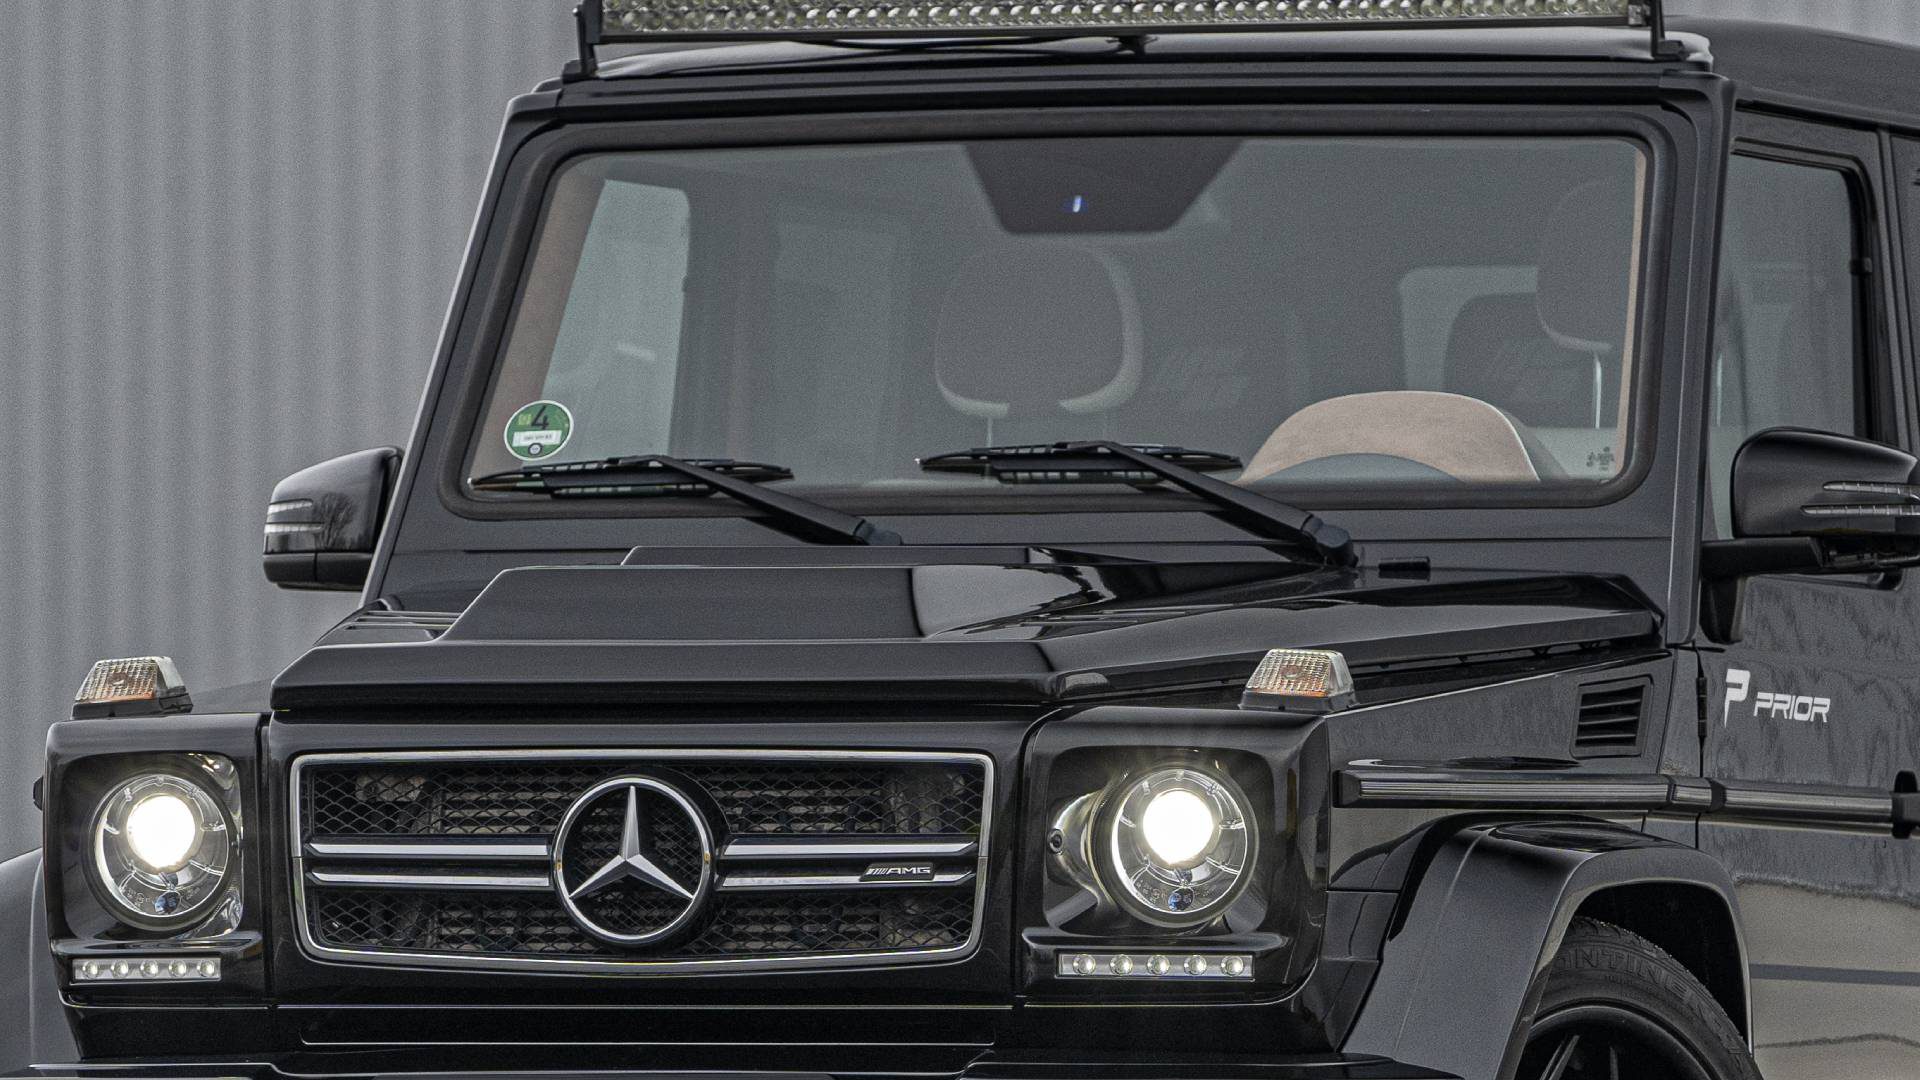 PD Engine Cover for Mercedes G-Class W463